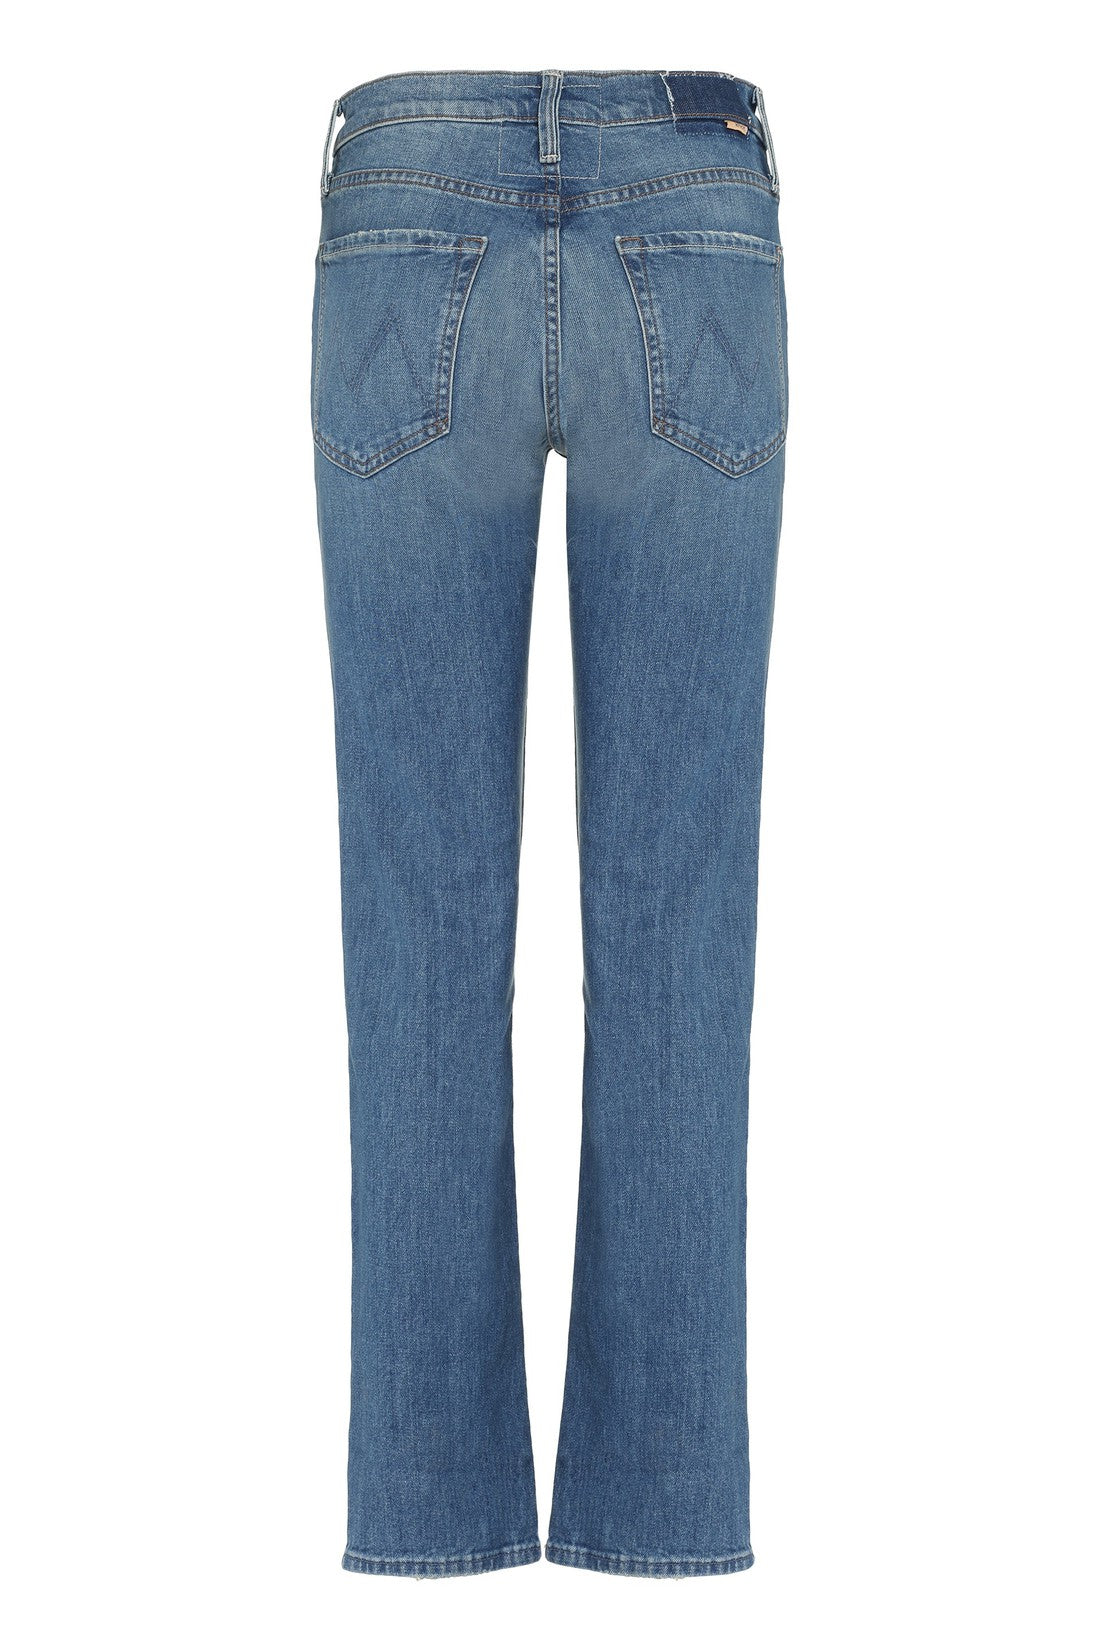 Mother-OUTLET-SALE-The Smarty straight leg jeans-ARCHIVIST